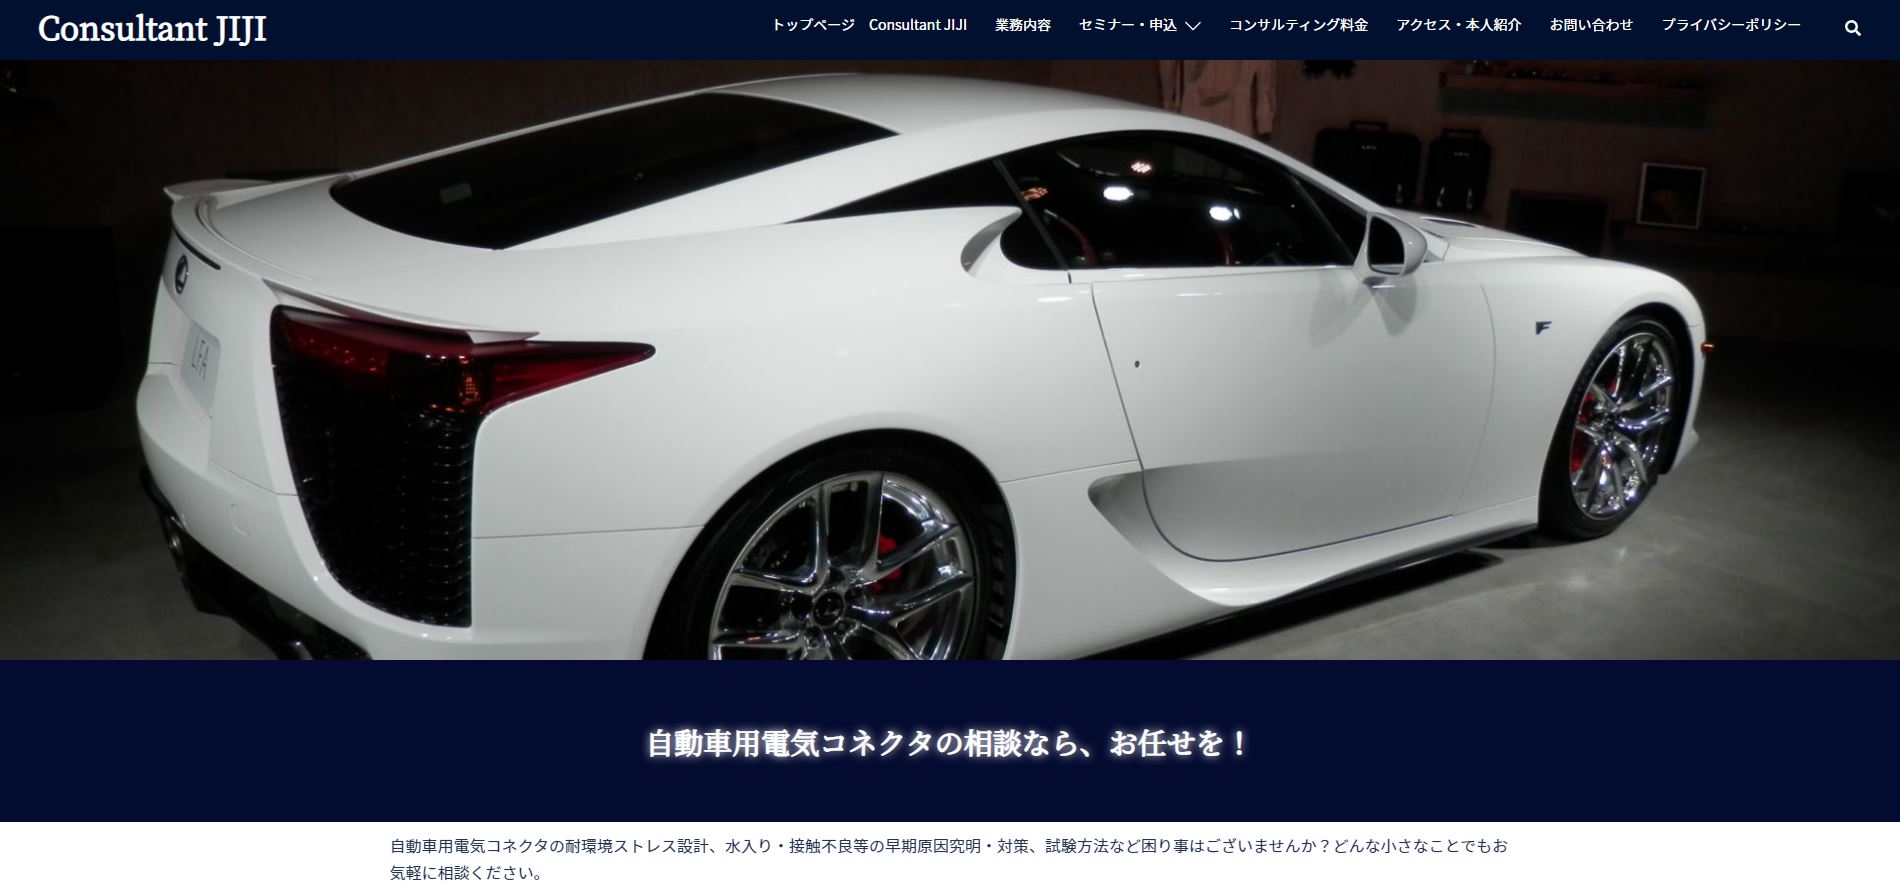 You are currently viewing 愛知県岡崎市自動車コネクタのConsultant-JIJI.com様のサイトを公開しました